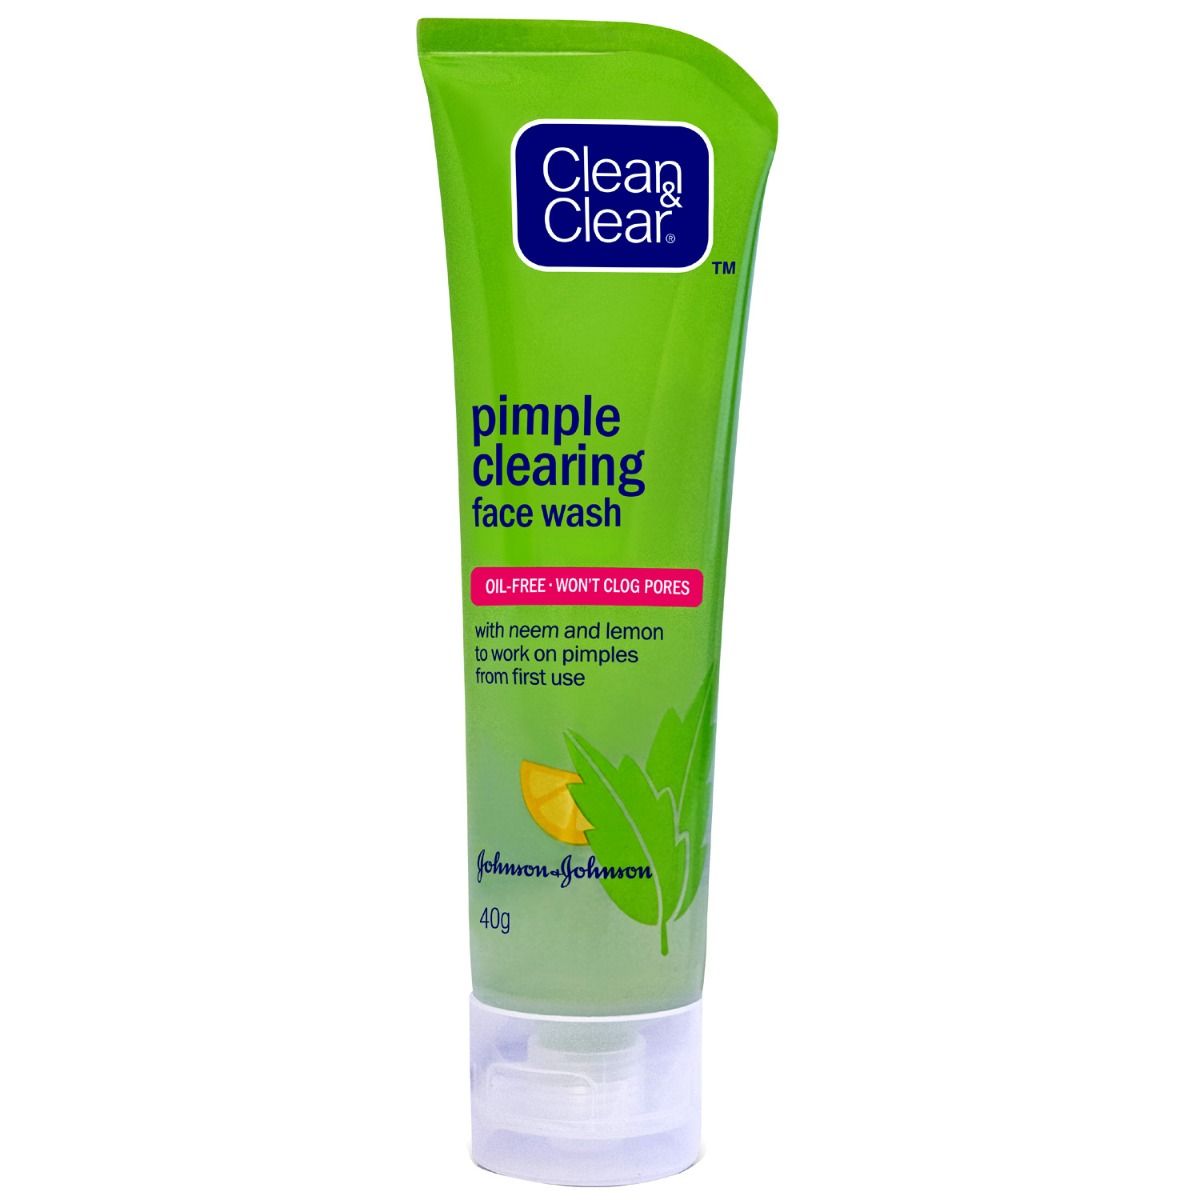 Buy Clean & Clear Pimple Clearing Face Wash, 40 gm Online